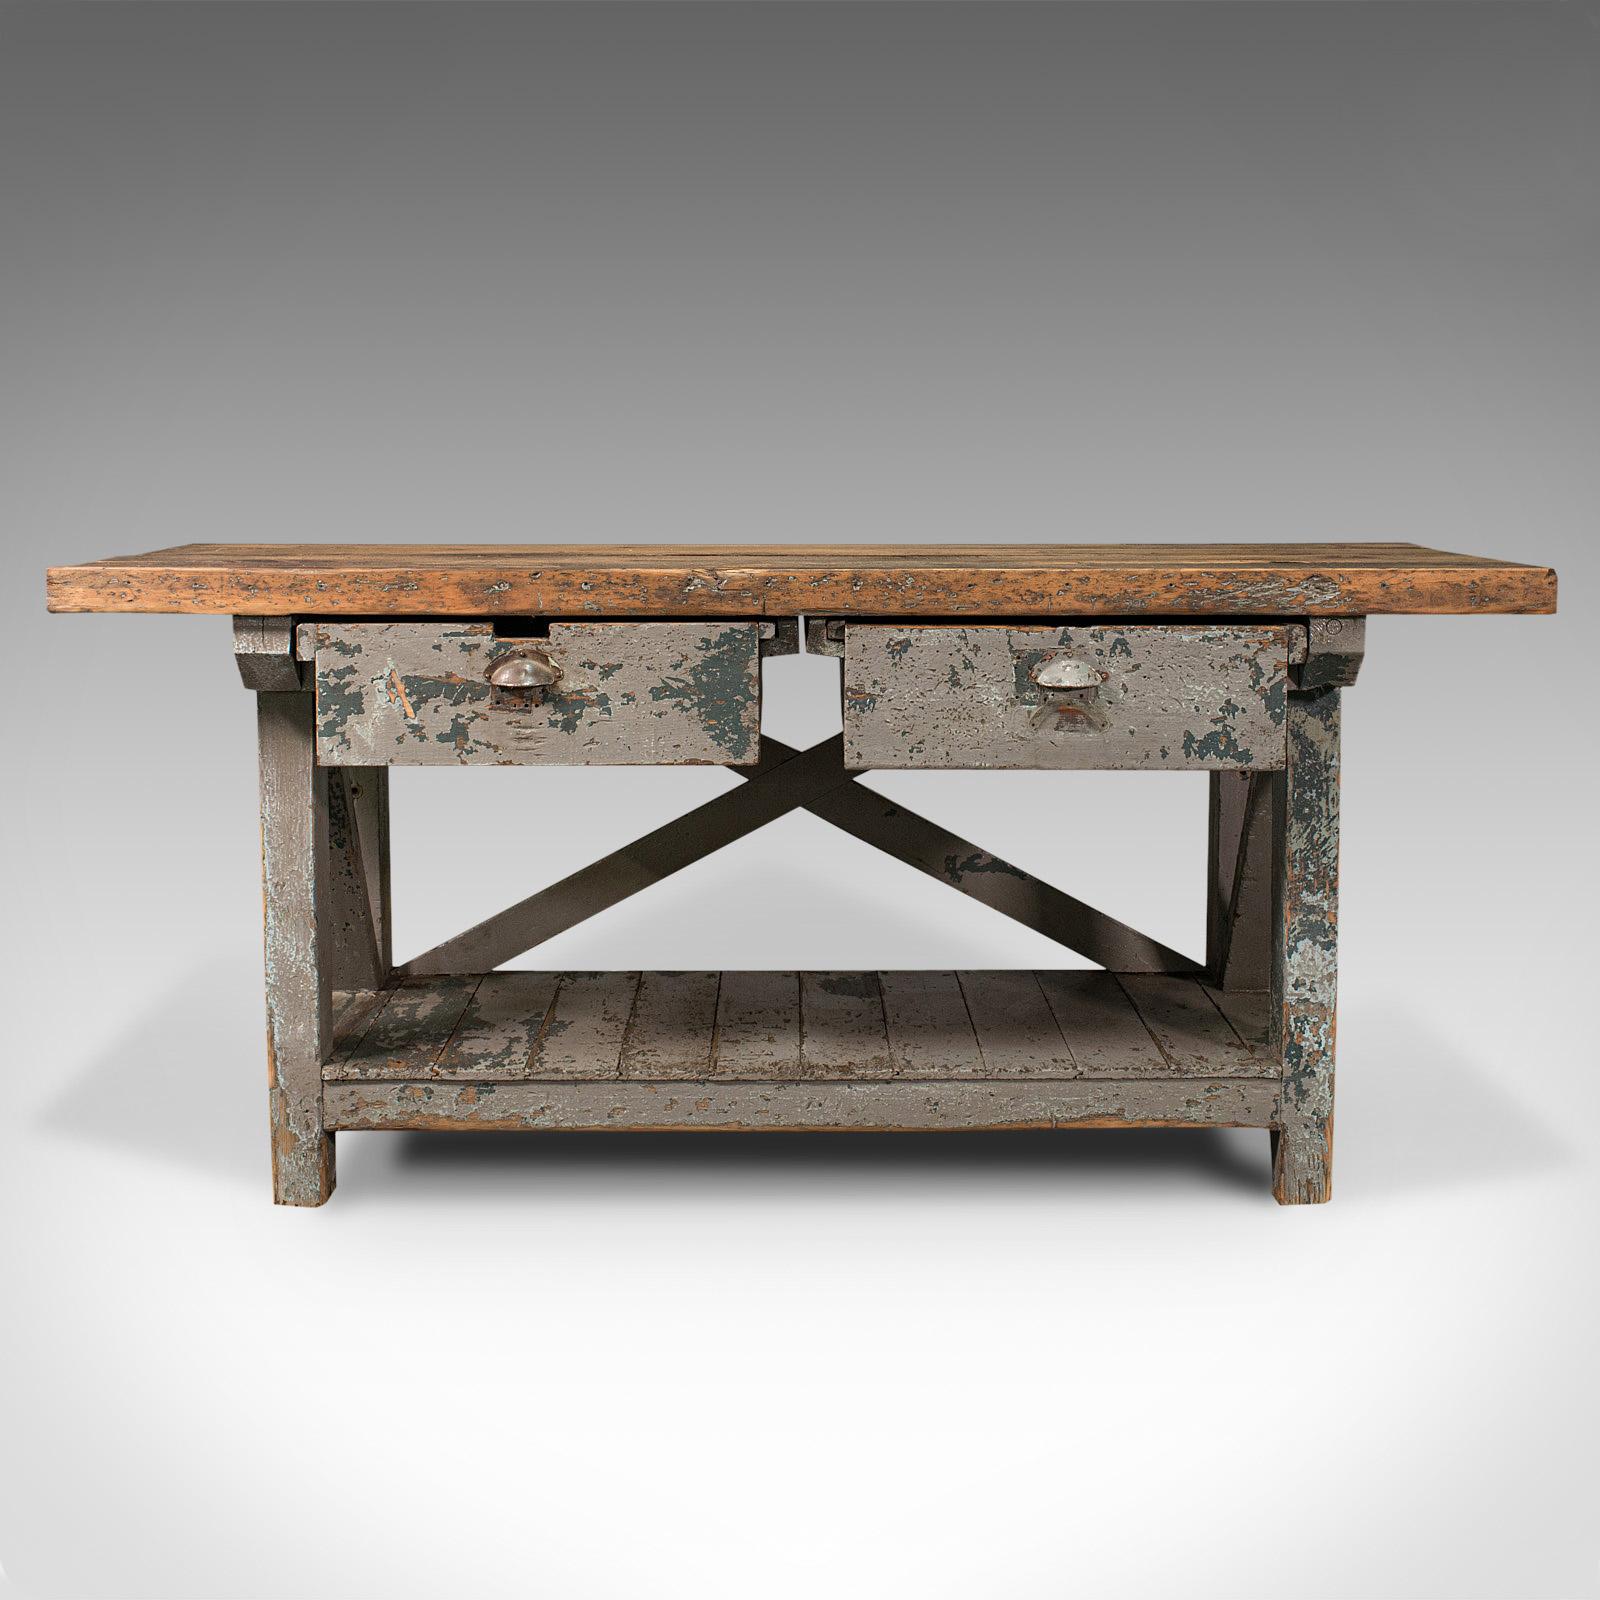 This is a large antique silversmith's bench. An English, pine industrial craftsman's table, dating to the Victorian period, circa 1900.

Wonderfully stout and strong antique artisan's table
Displays a desirable aged patina throughout
Thick